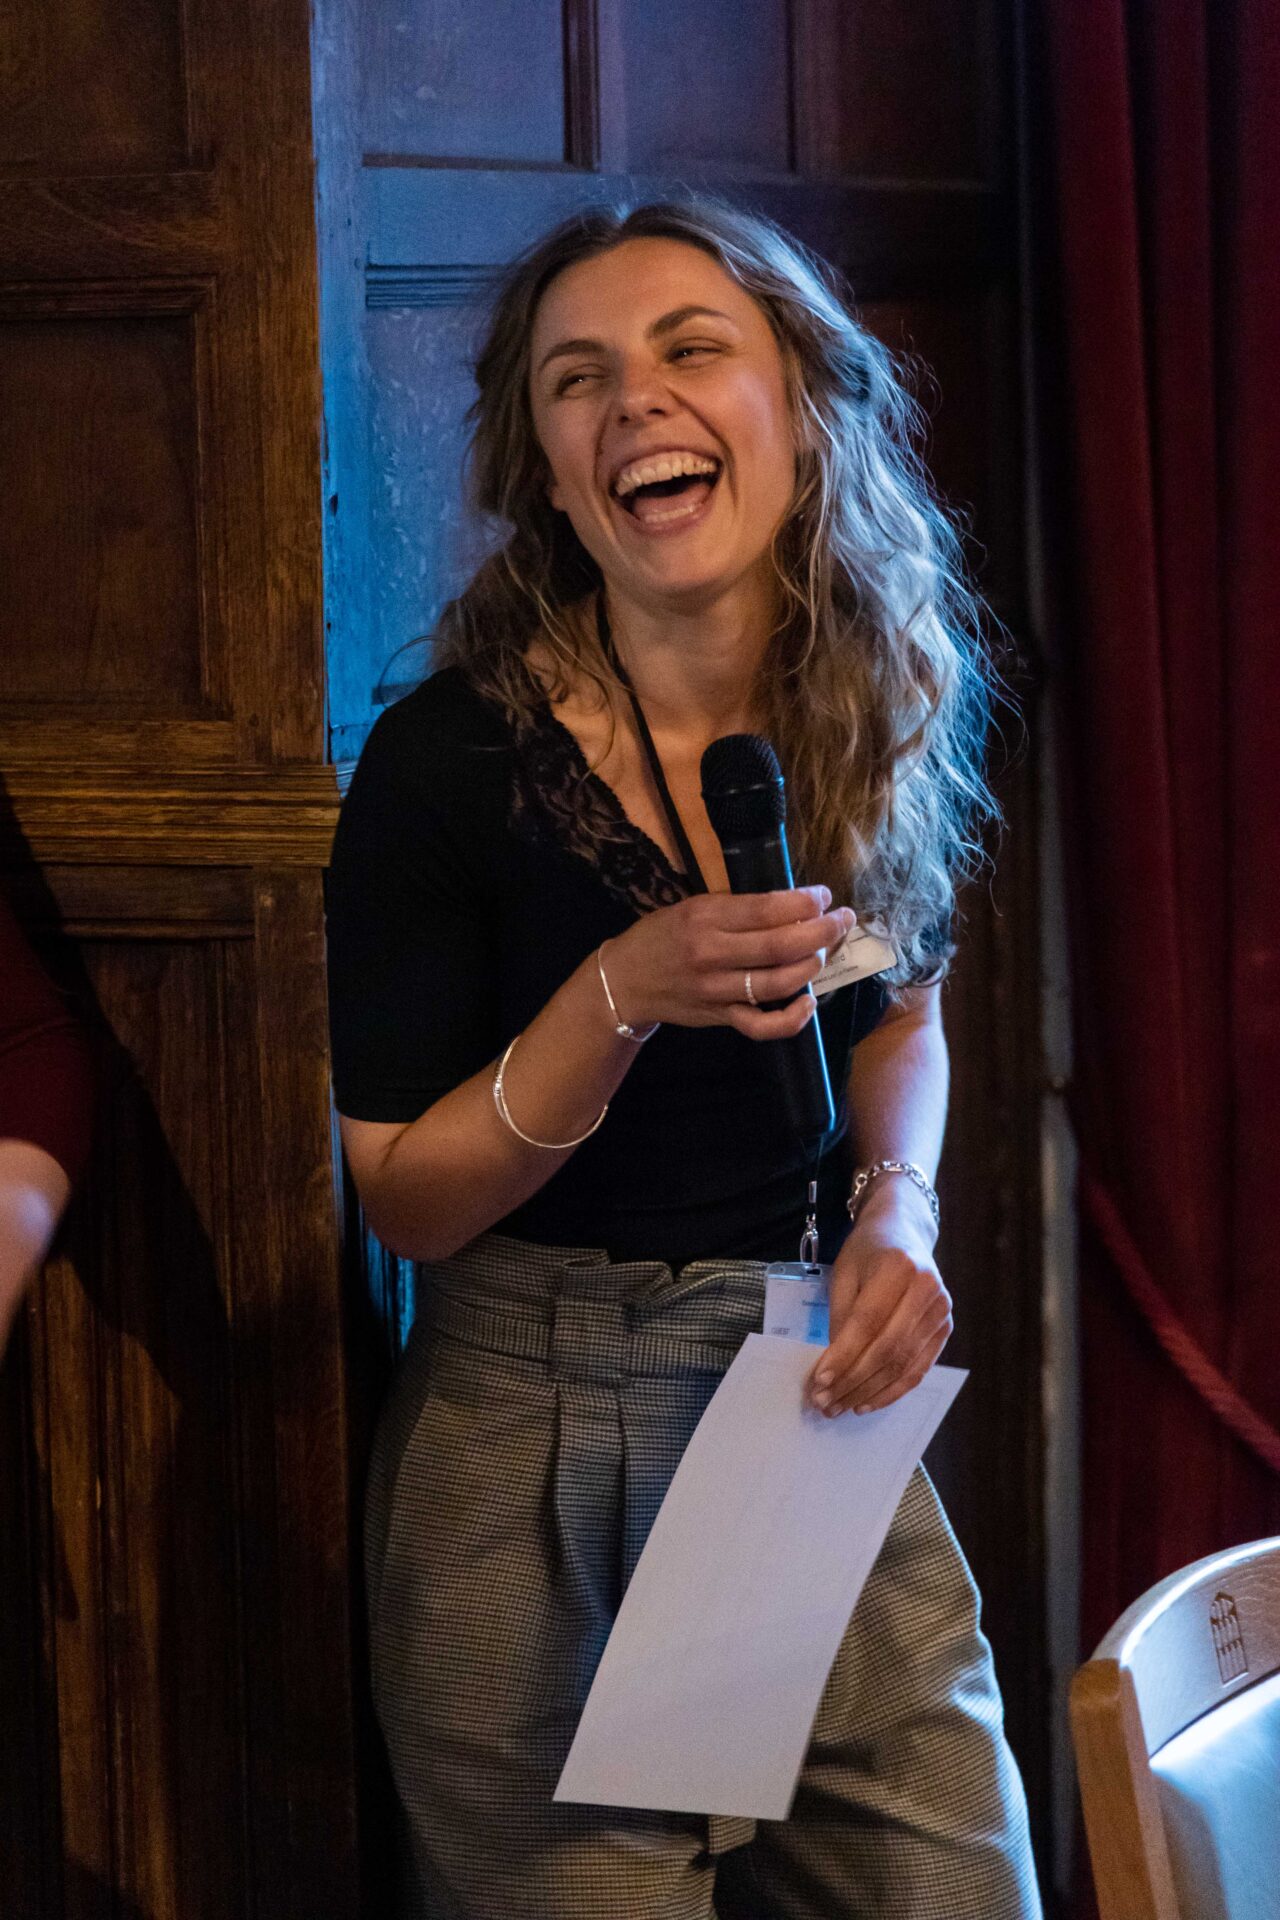 A Cumberland Lodge Fellow laughing as she gives a speech.